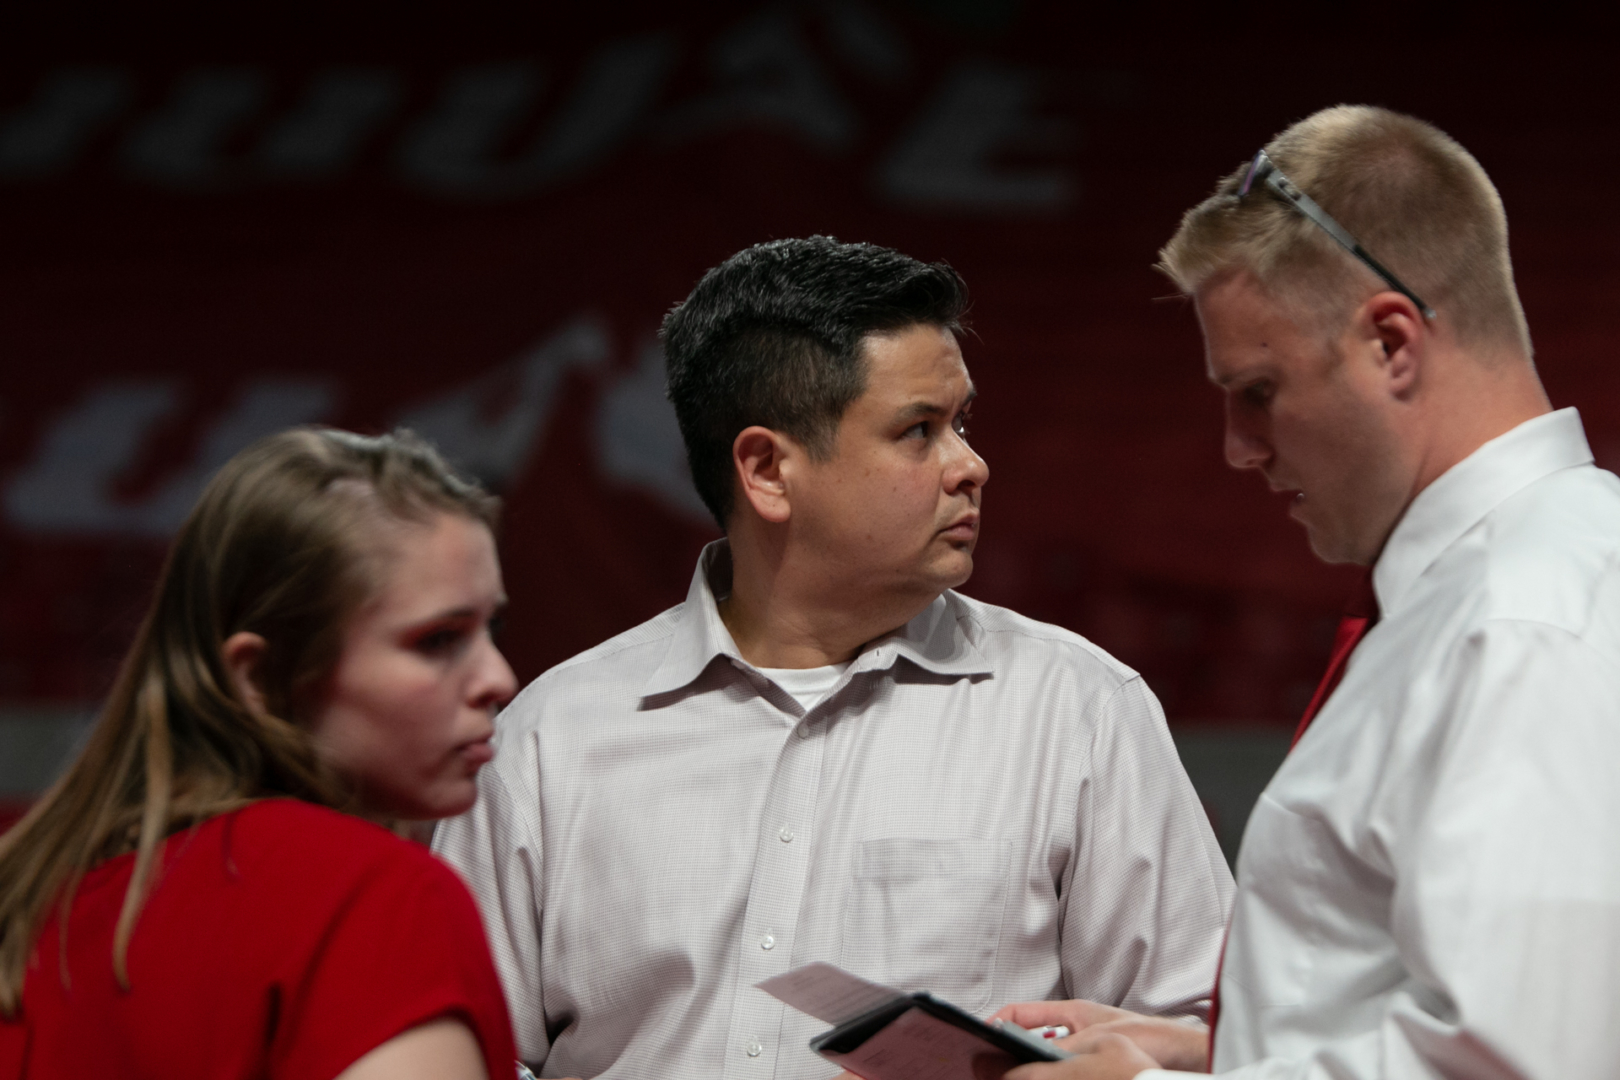 UH volleyball head coach David Rehr huddles up with his coaching staff during a game in the Flo Hyman Collegiate Cup at Fertitta Center during the 2019 season. | Kathryn Lenihan/The Cougar